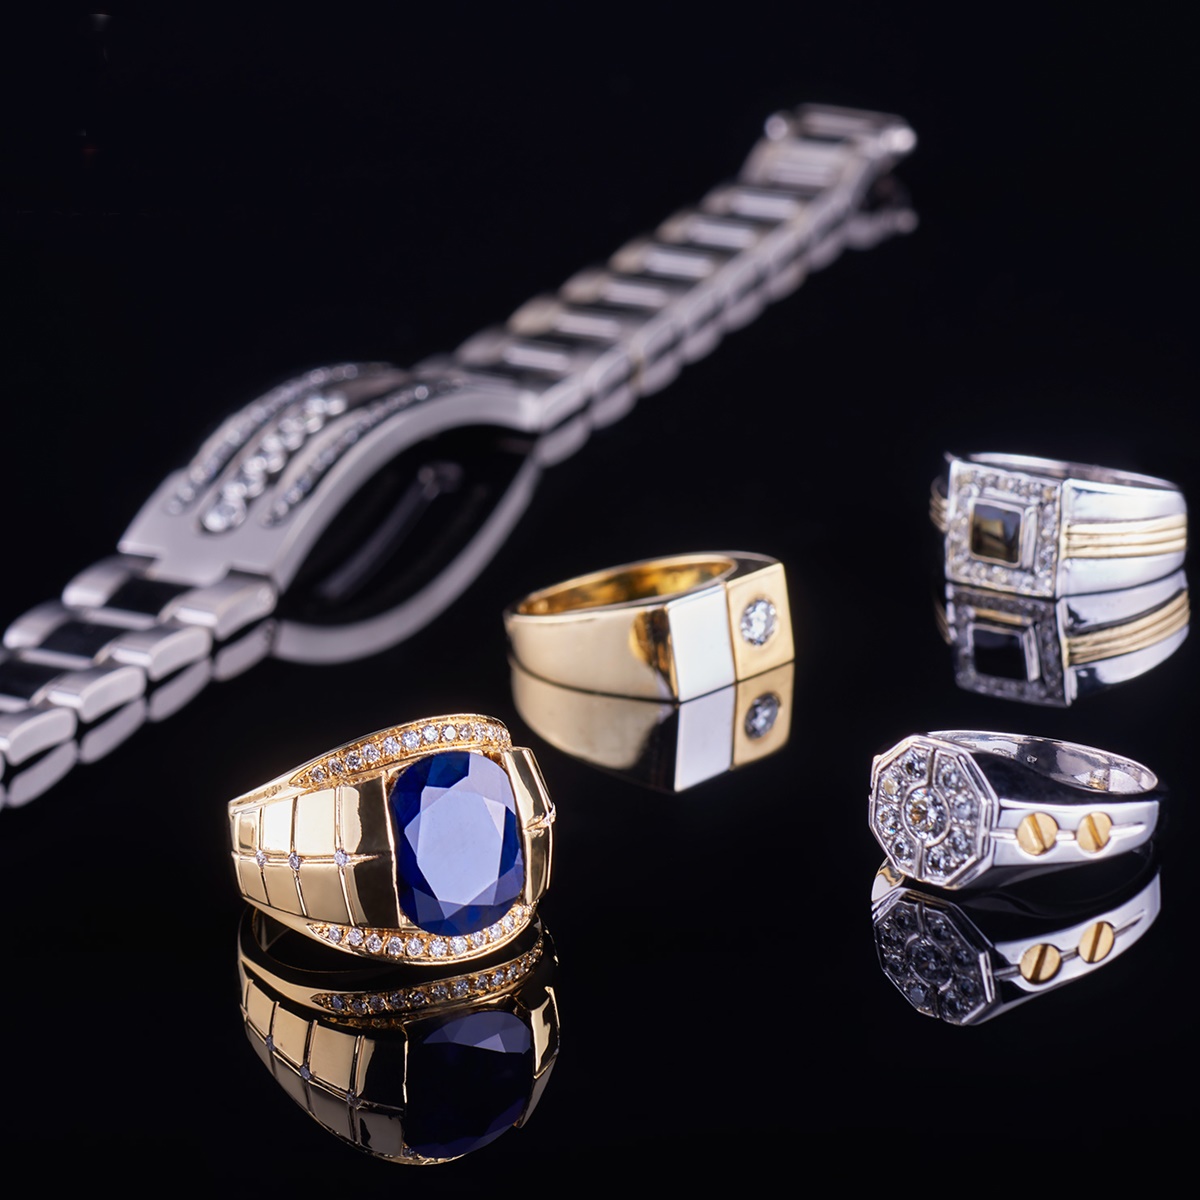 ORIGINAL CHRISTMAS GIFTS FOR MEN. SURPRISE HIM WITH A JEWELRY